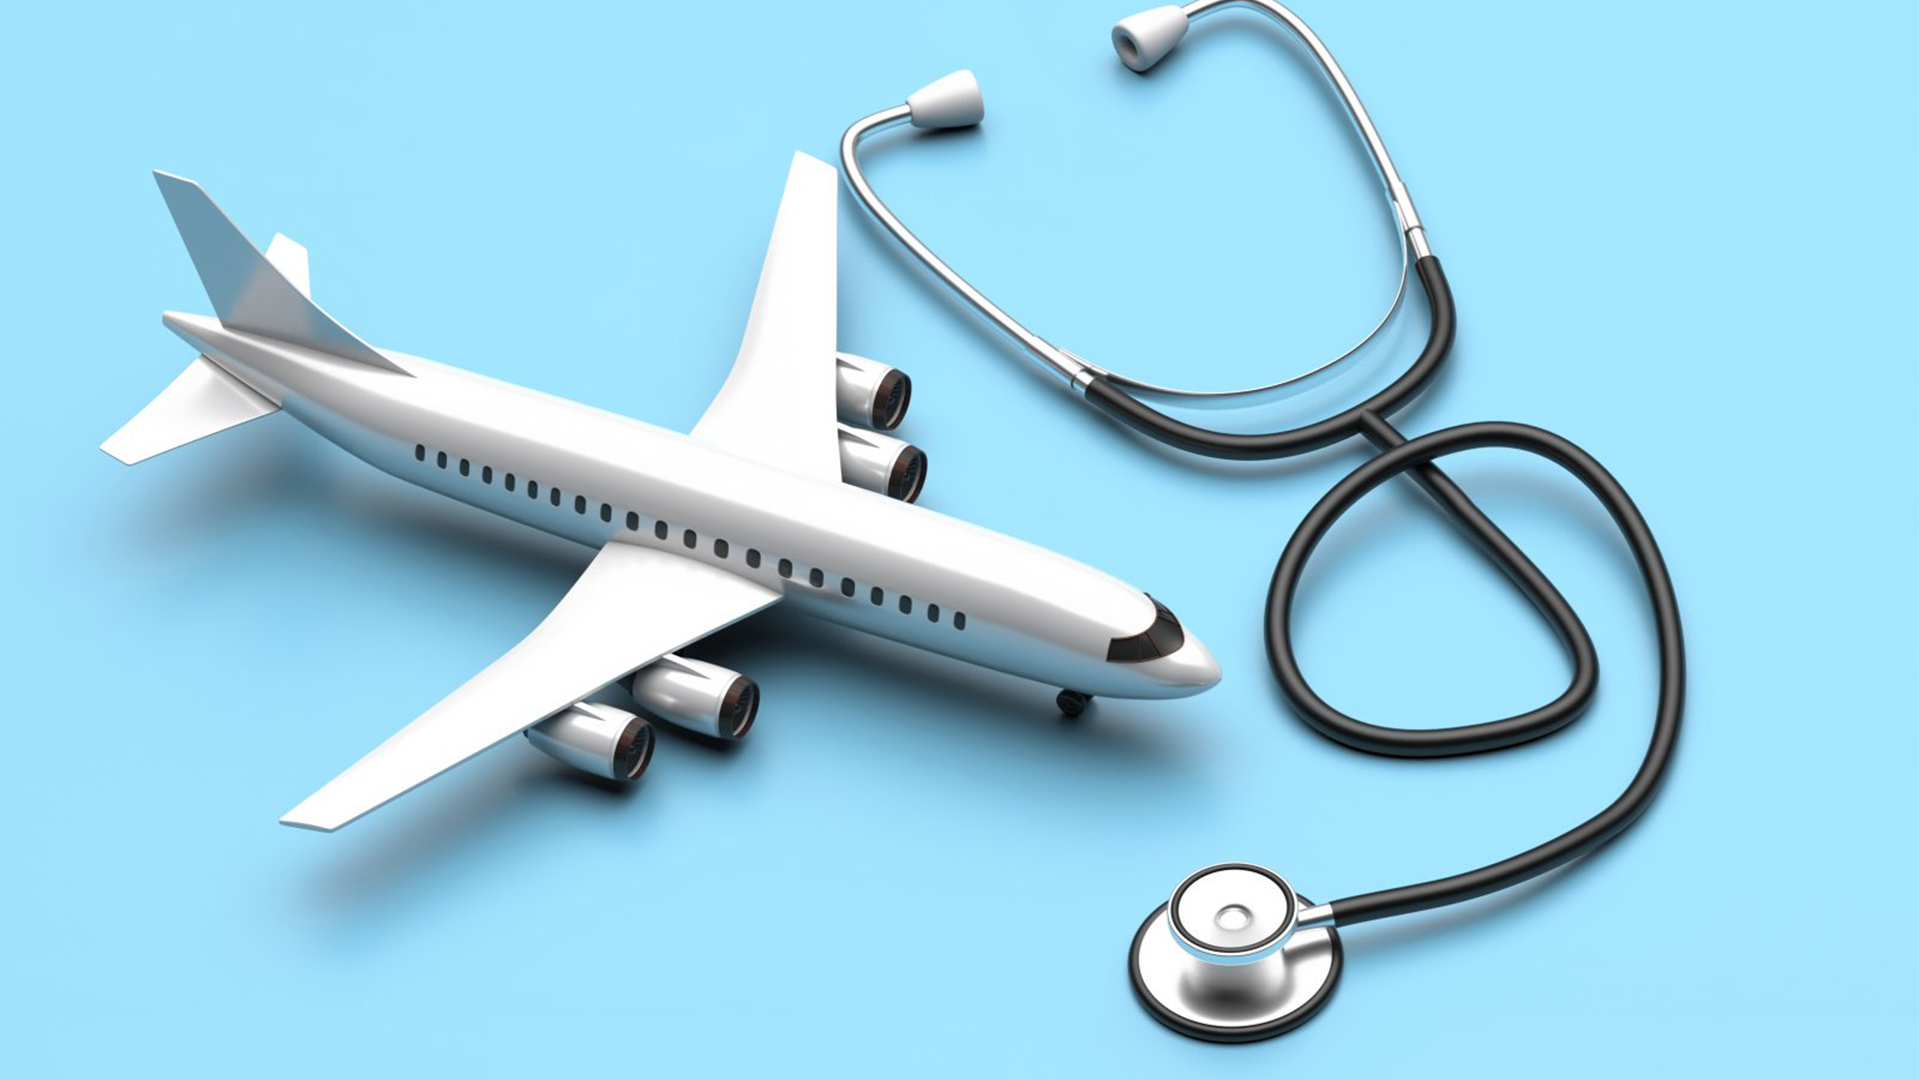 What are the Advantages of Health Tourism?